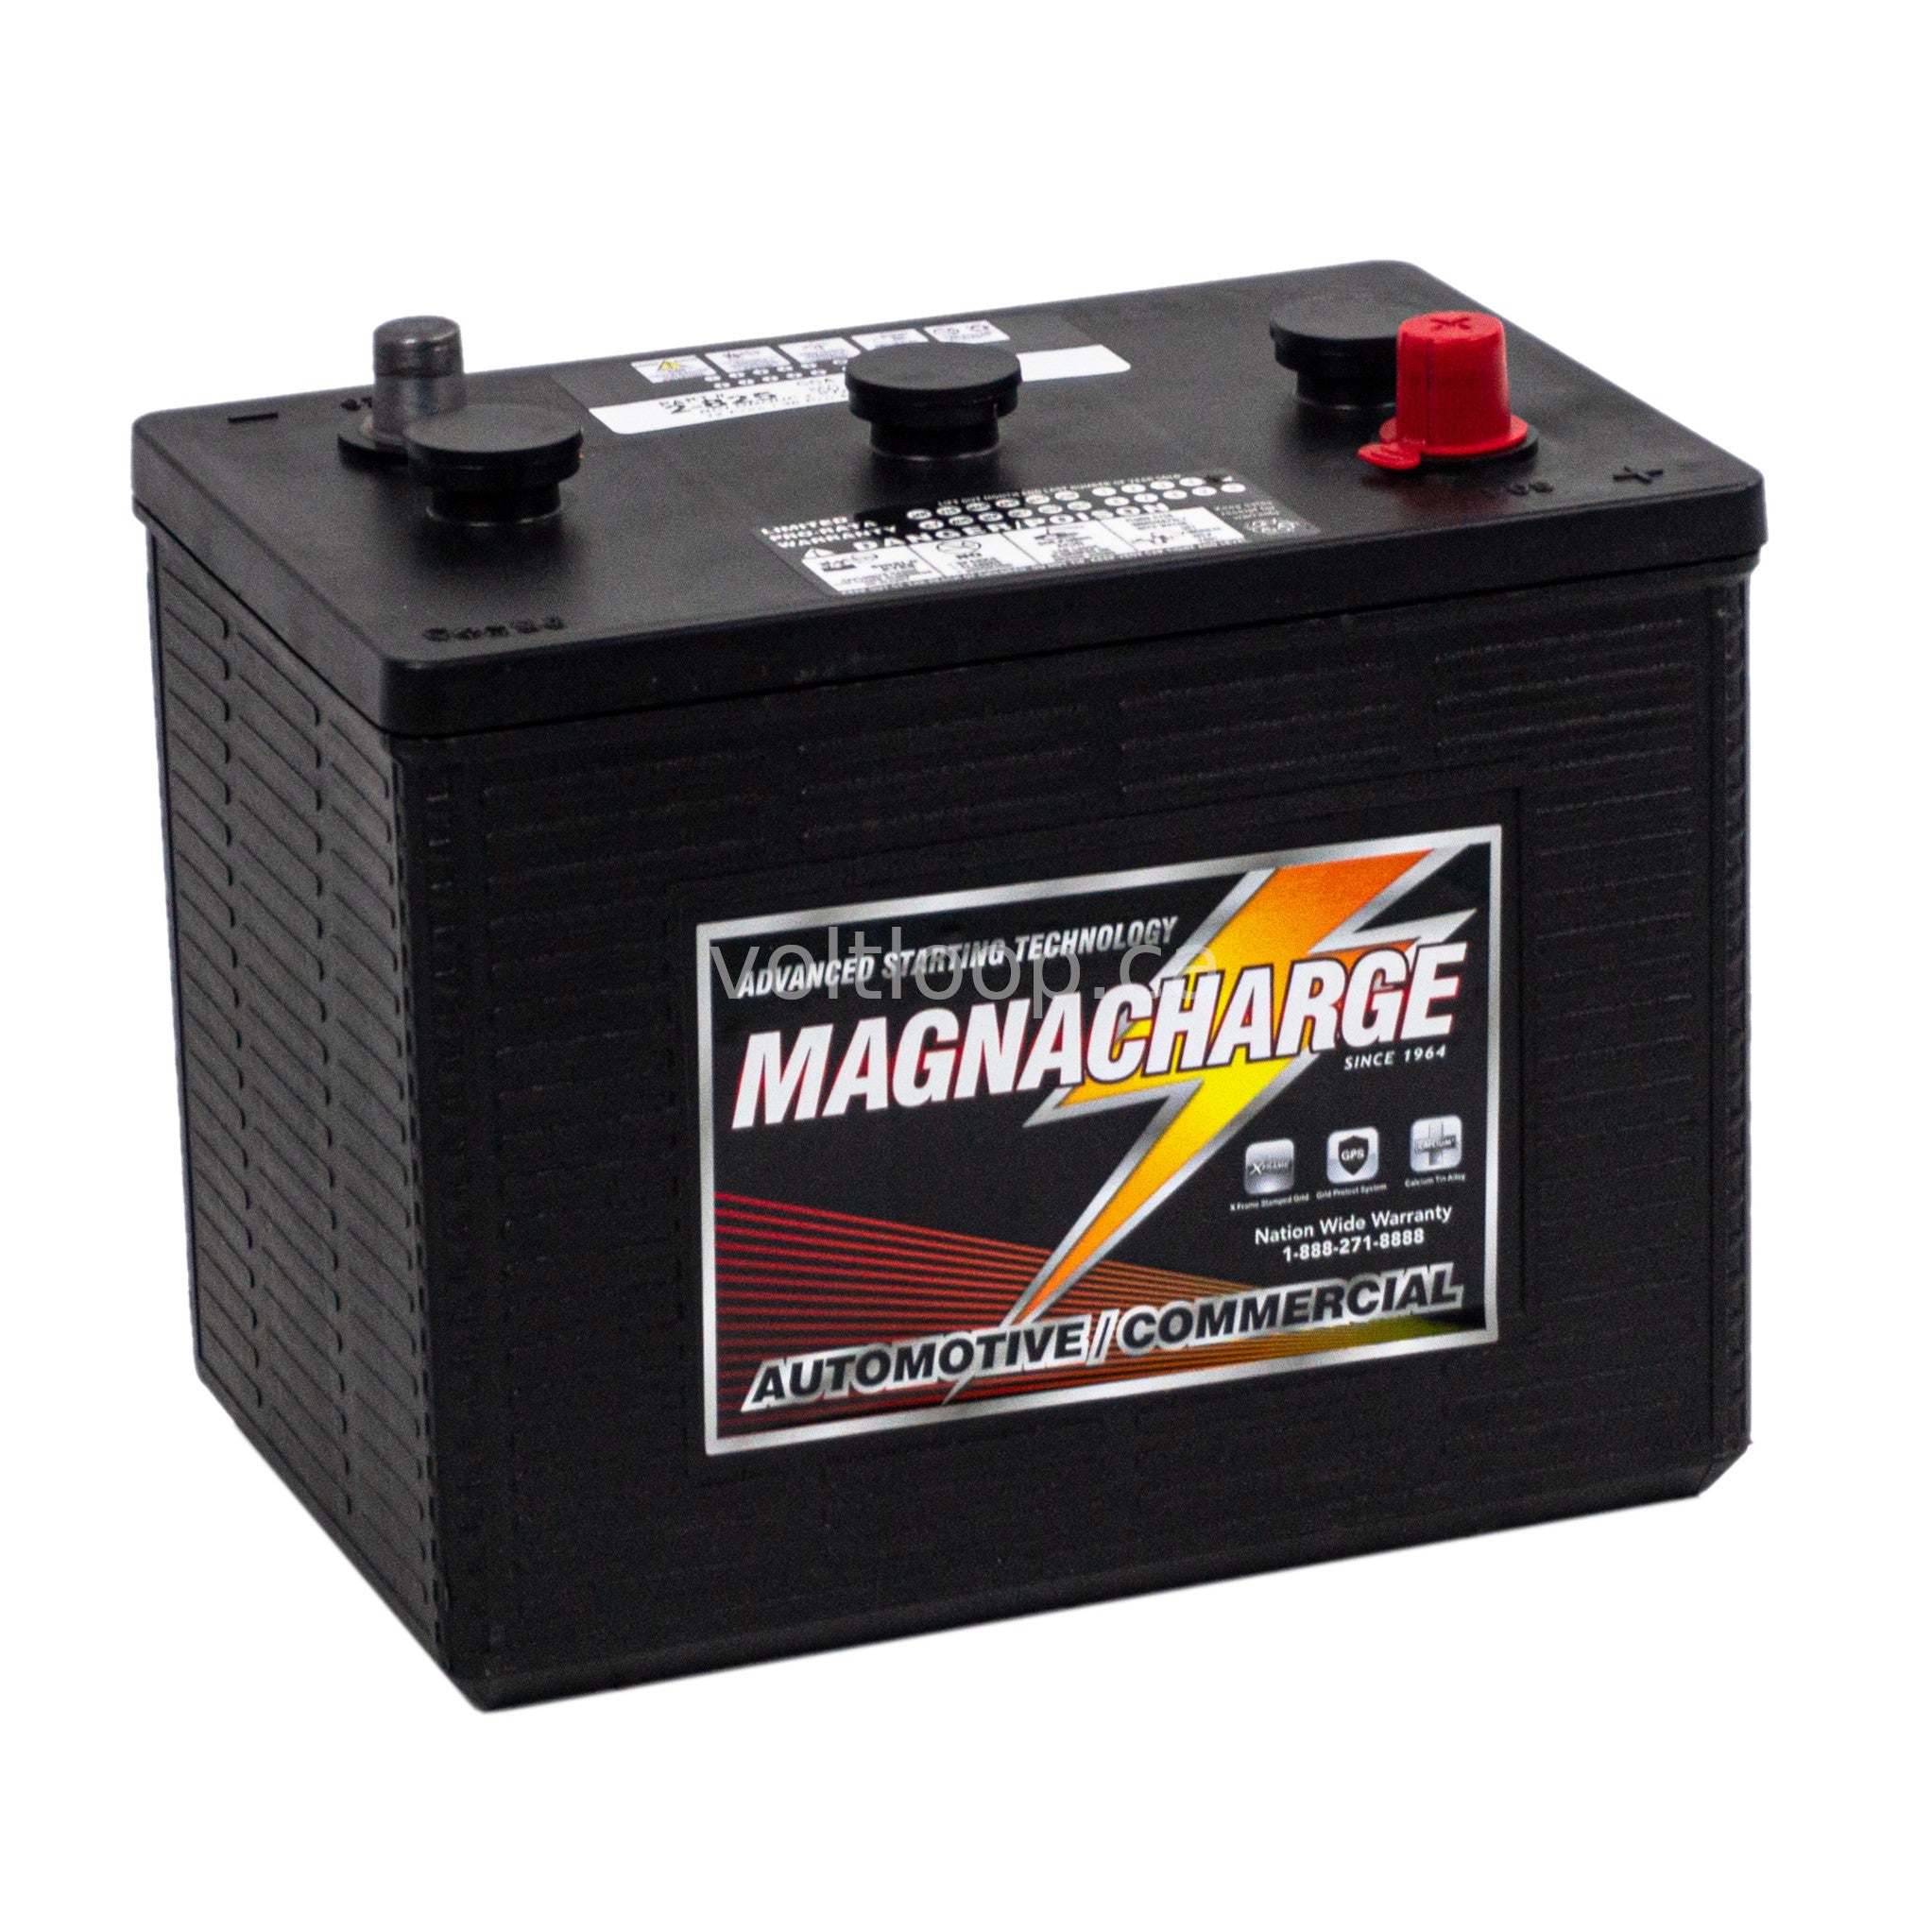 Magnacharge 2-825 Group 2 Truck Battery